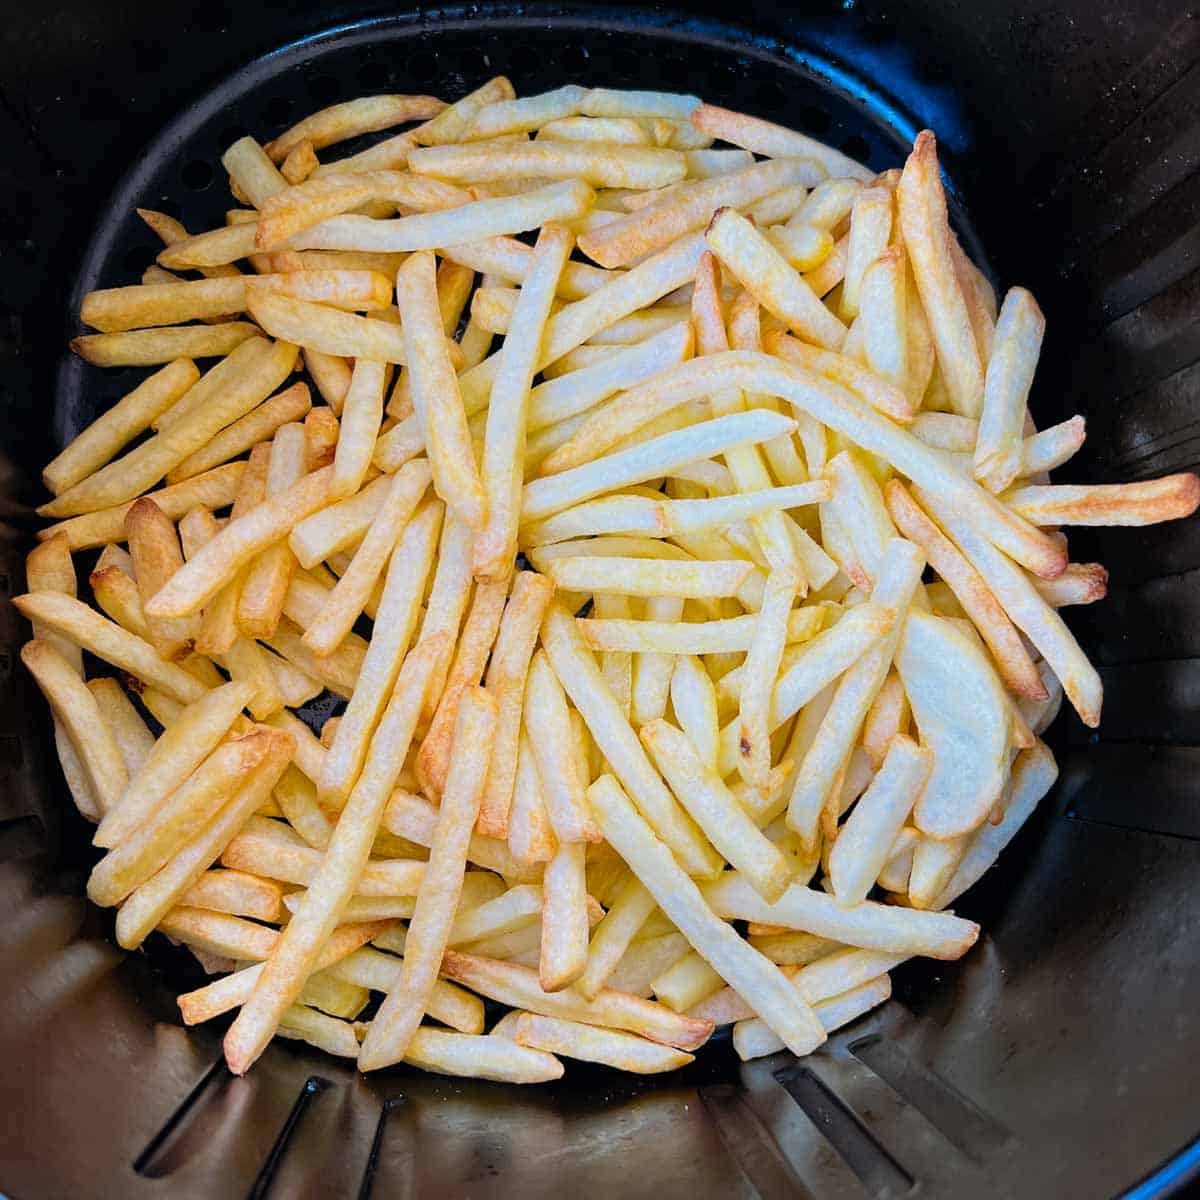 Make the fries in air fryer or oven.